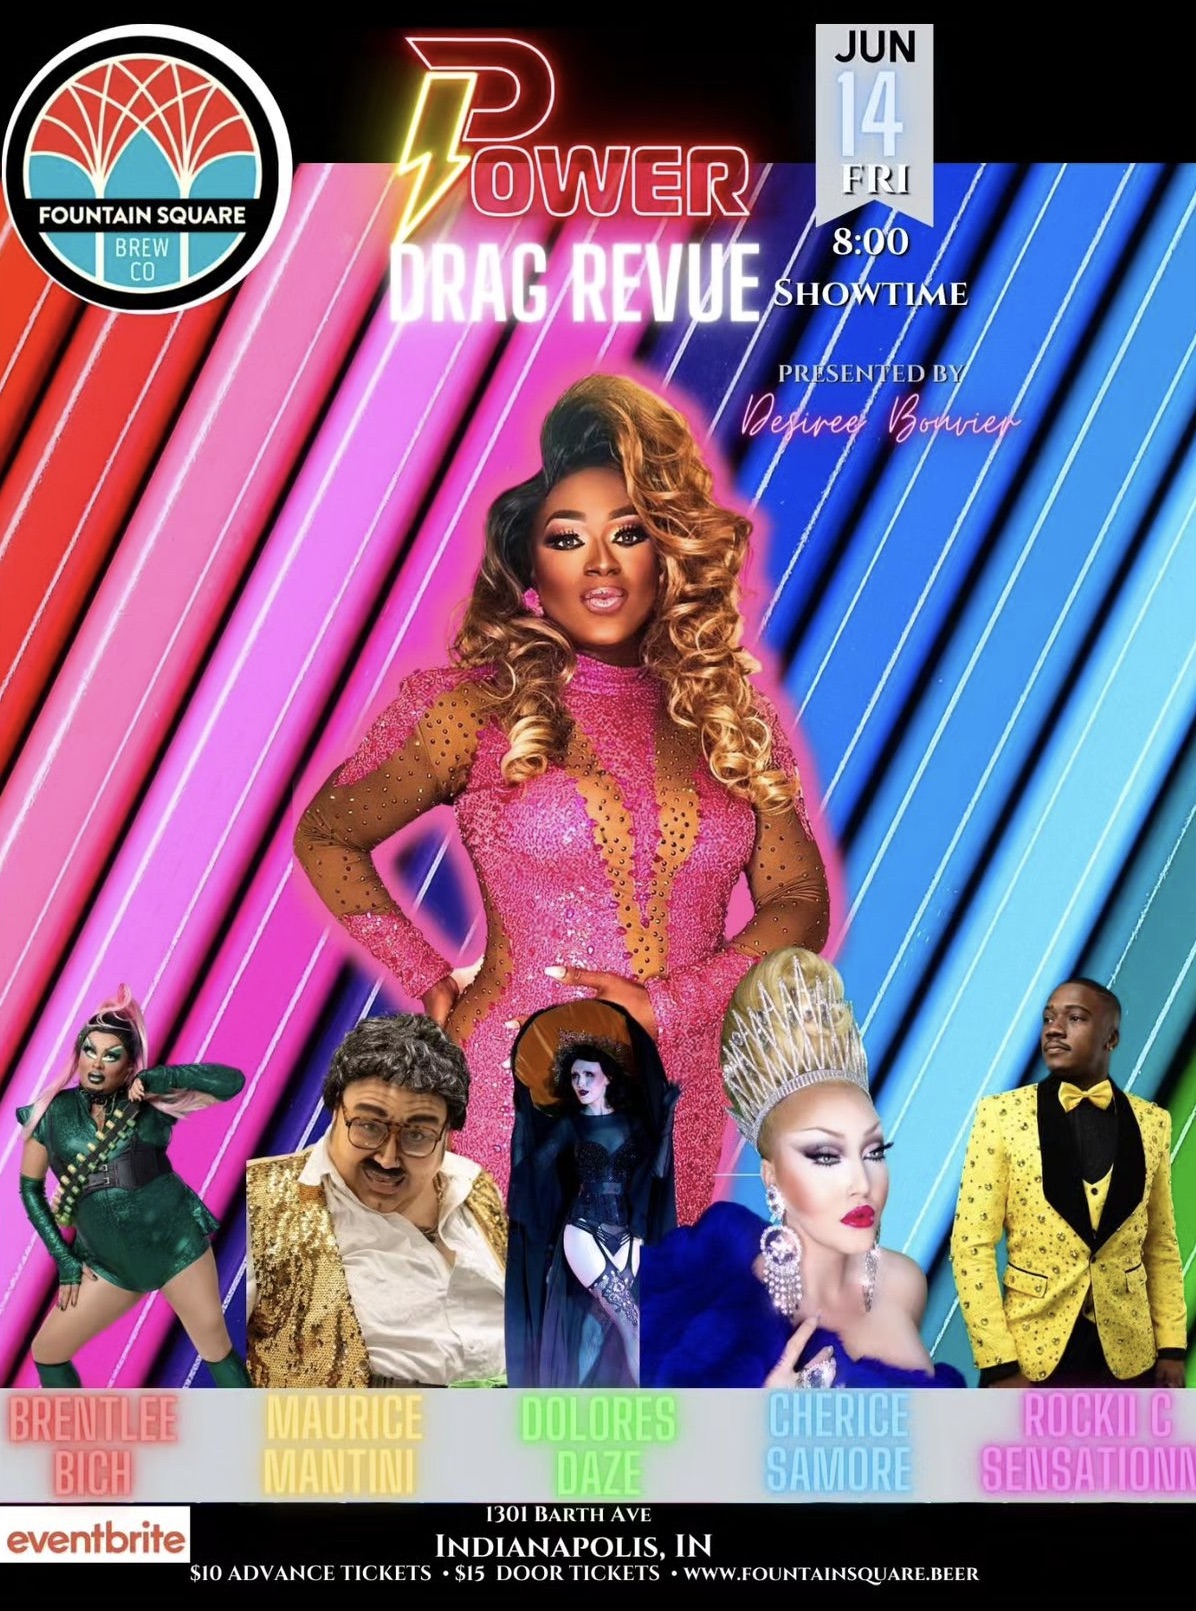 power drag revue returns with their showcase on friday, june 14 at 8. must be 21 or older, tickets are 10 dollars presale and 15 dollars day of show.